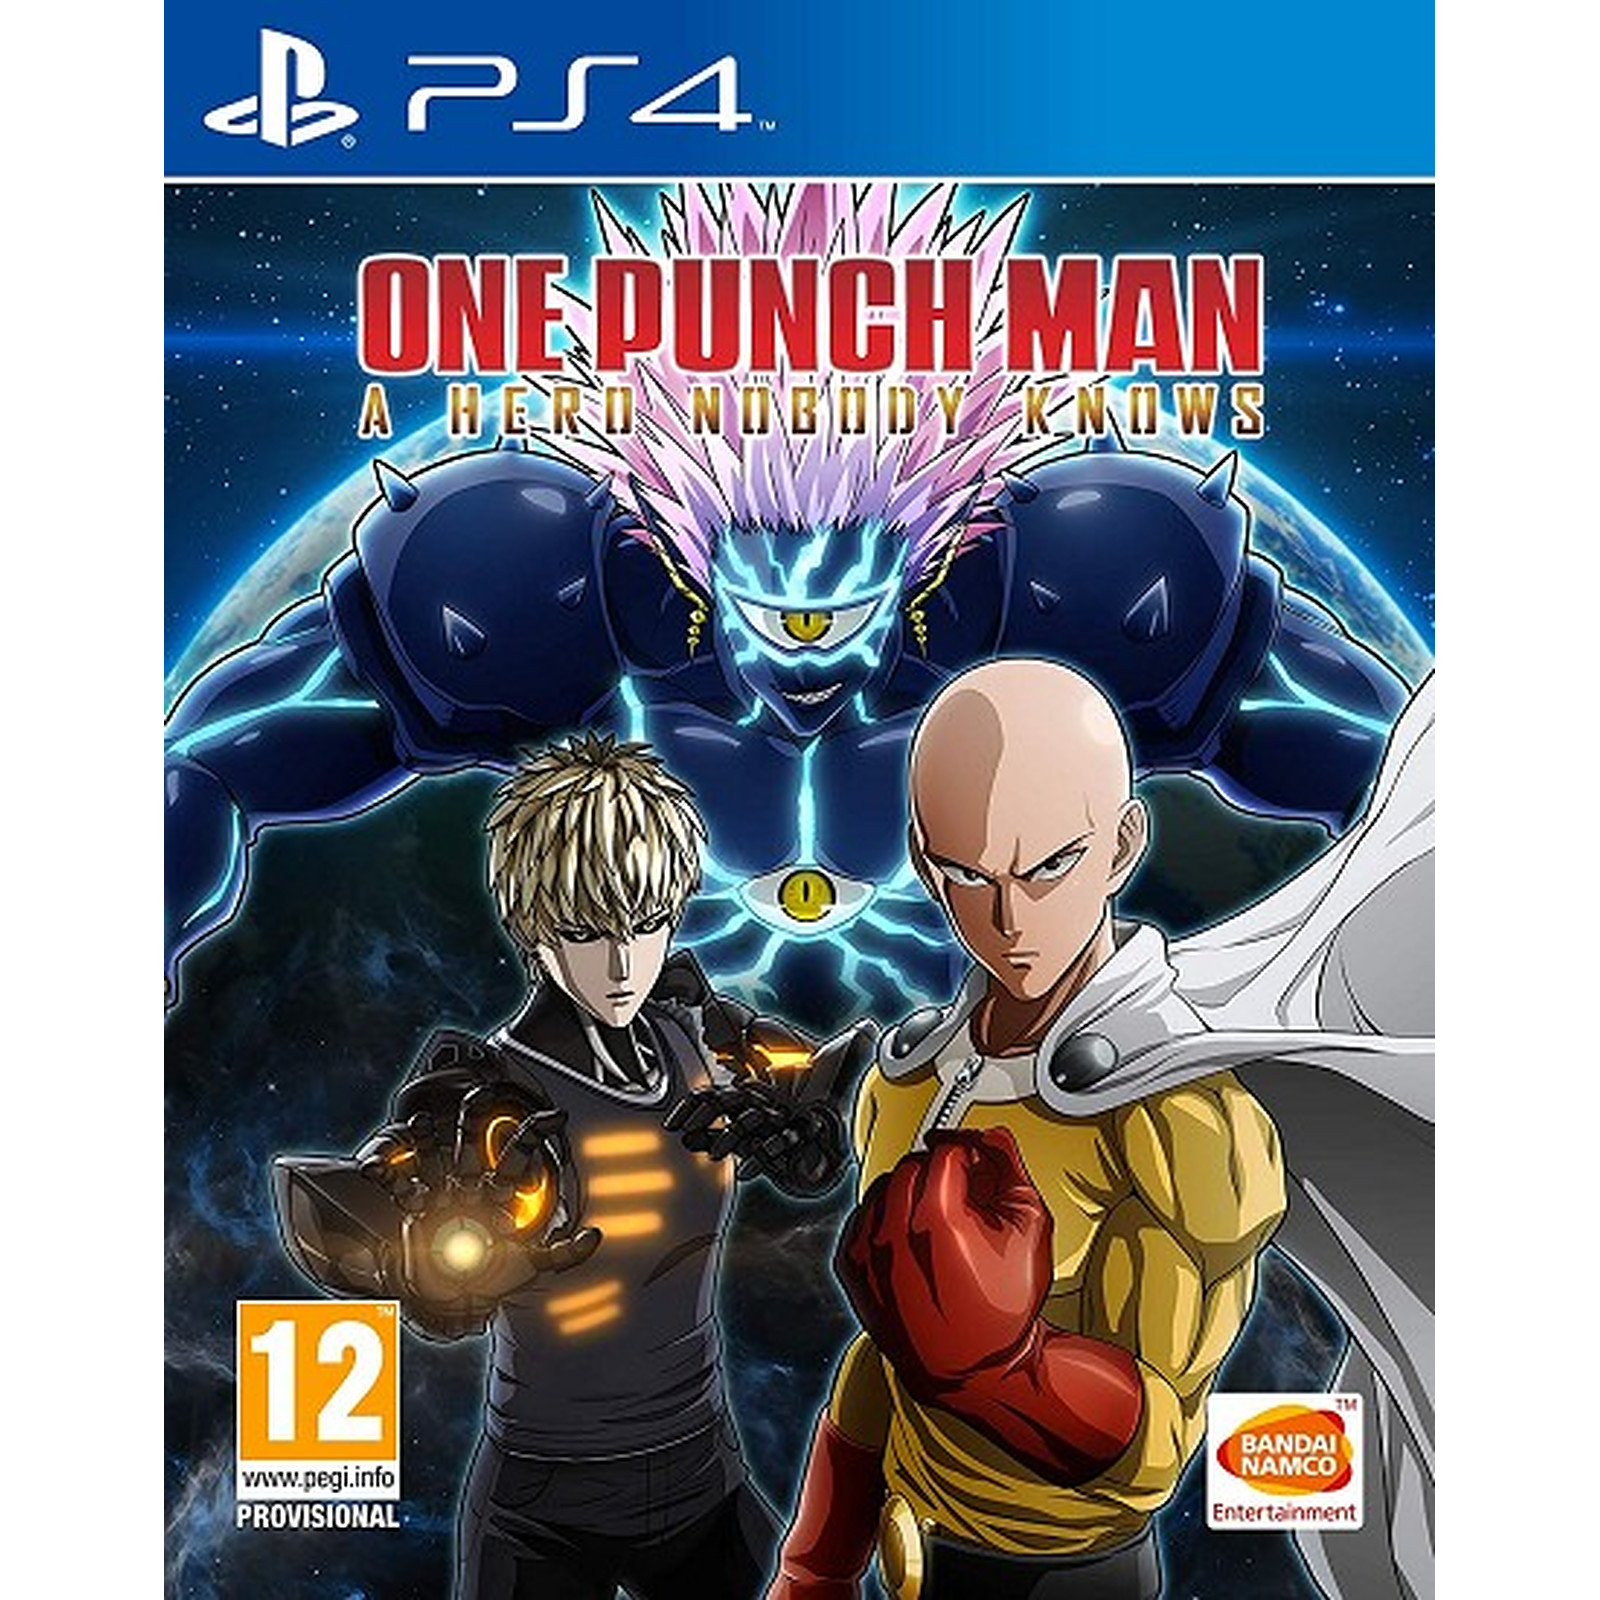 One Punch Man A Hero Nobody Knows (PS4) - Jeux PS4 Bandai Namco Games